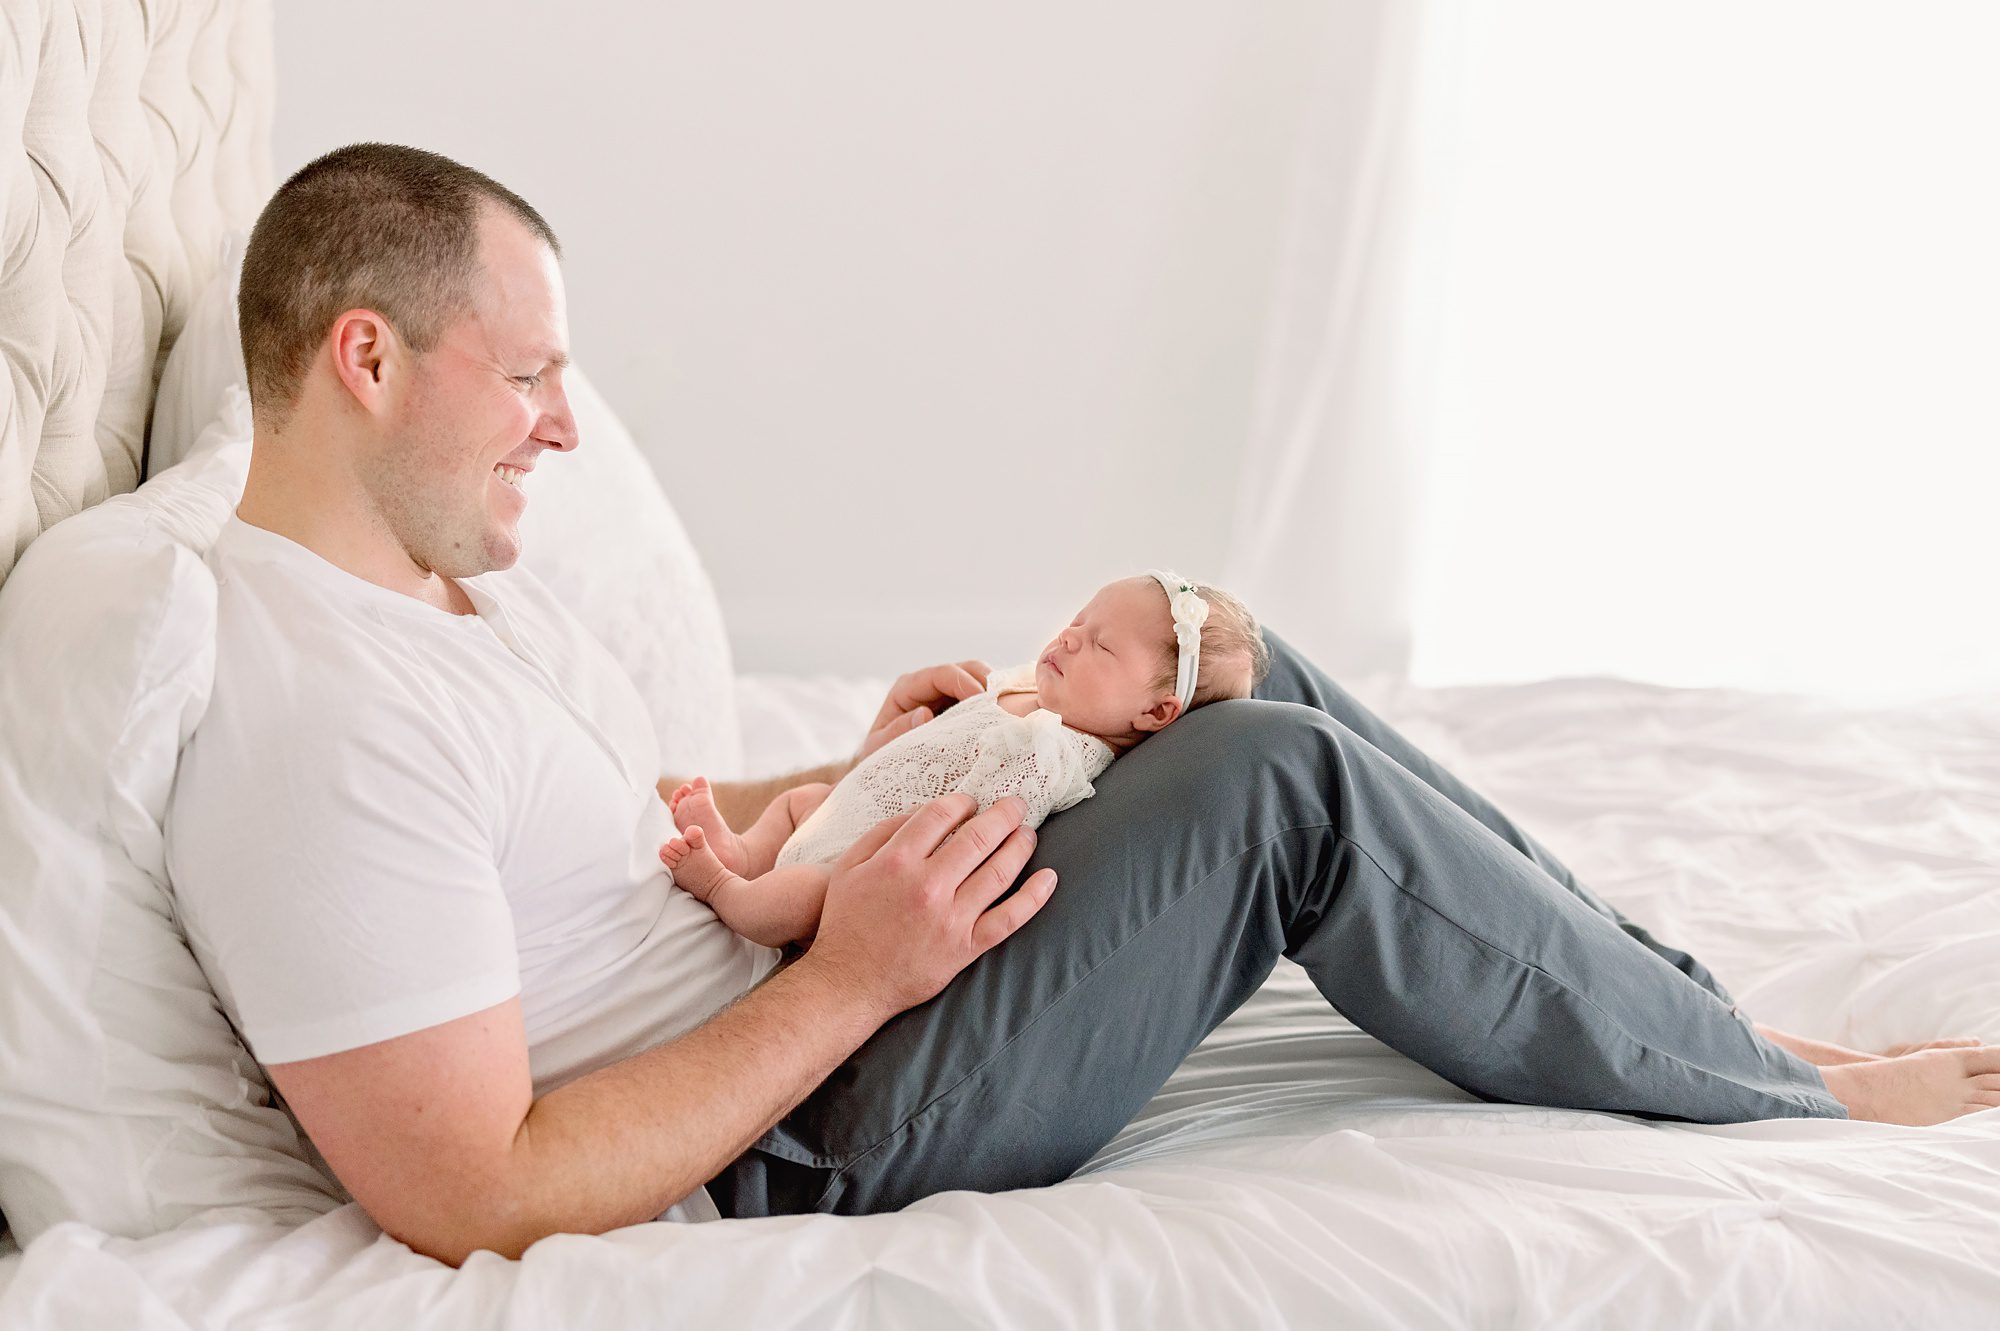 A family of 4 gets natural newborn portraits done in a bright white studio in Denver CO.